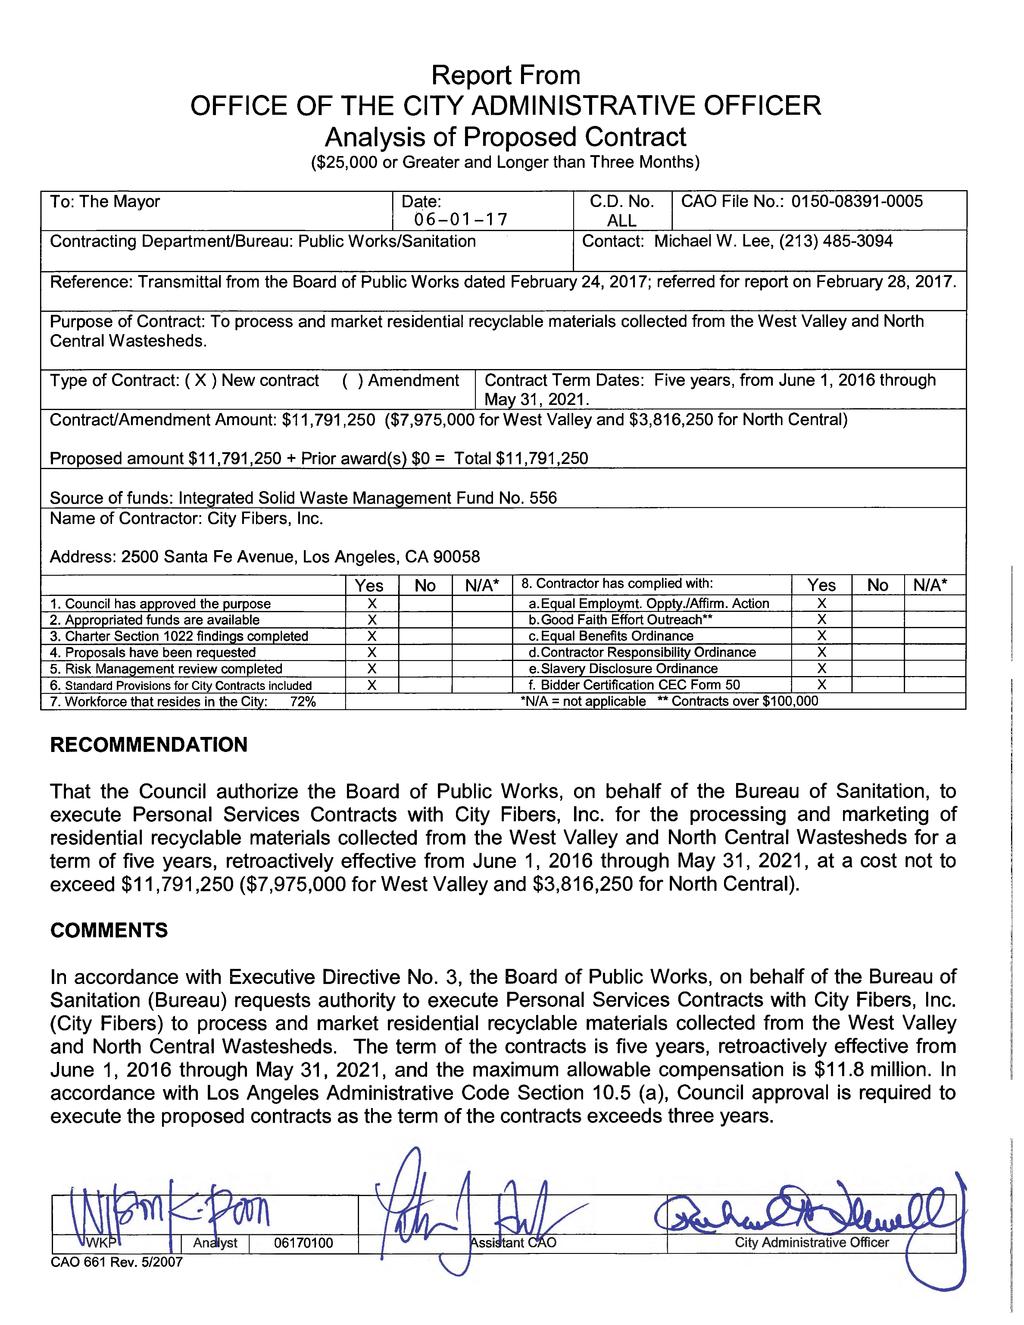 Report From OFFICE OF THE CITY ADMINISTRATIVE OFFICER Analysis of Proposed Contract ($25,000 or Greater and Longer than Three Months) C.D. No. CAO File No.: ALL Contact: Michael W.